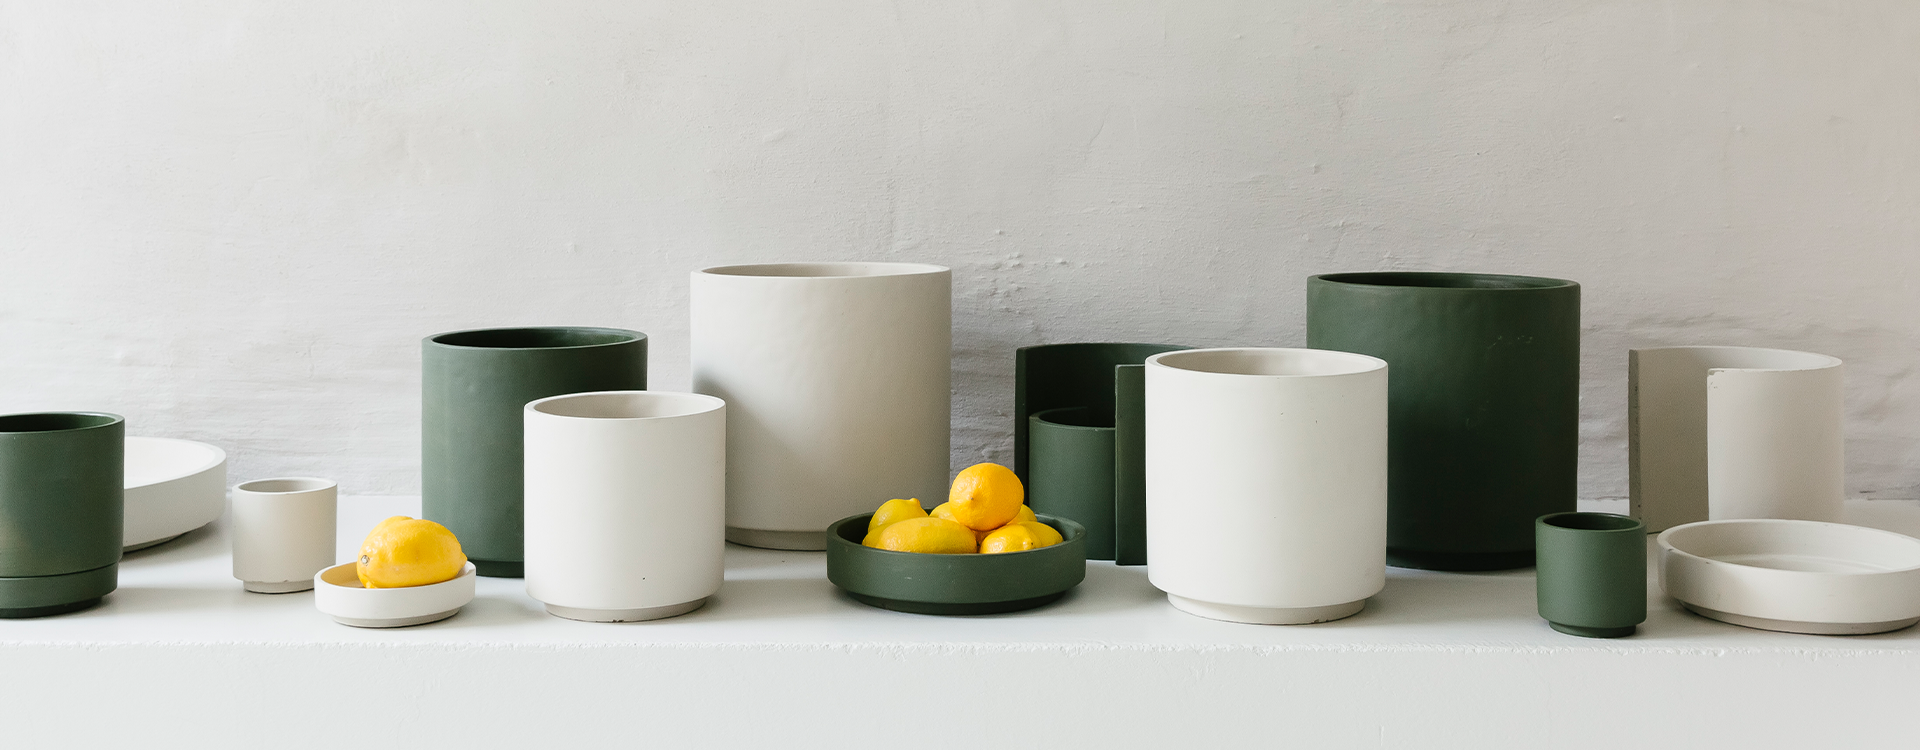 KOS collectie by Anouk Taeymans